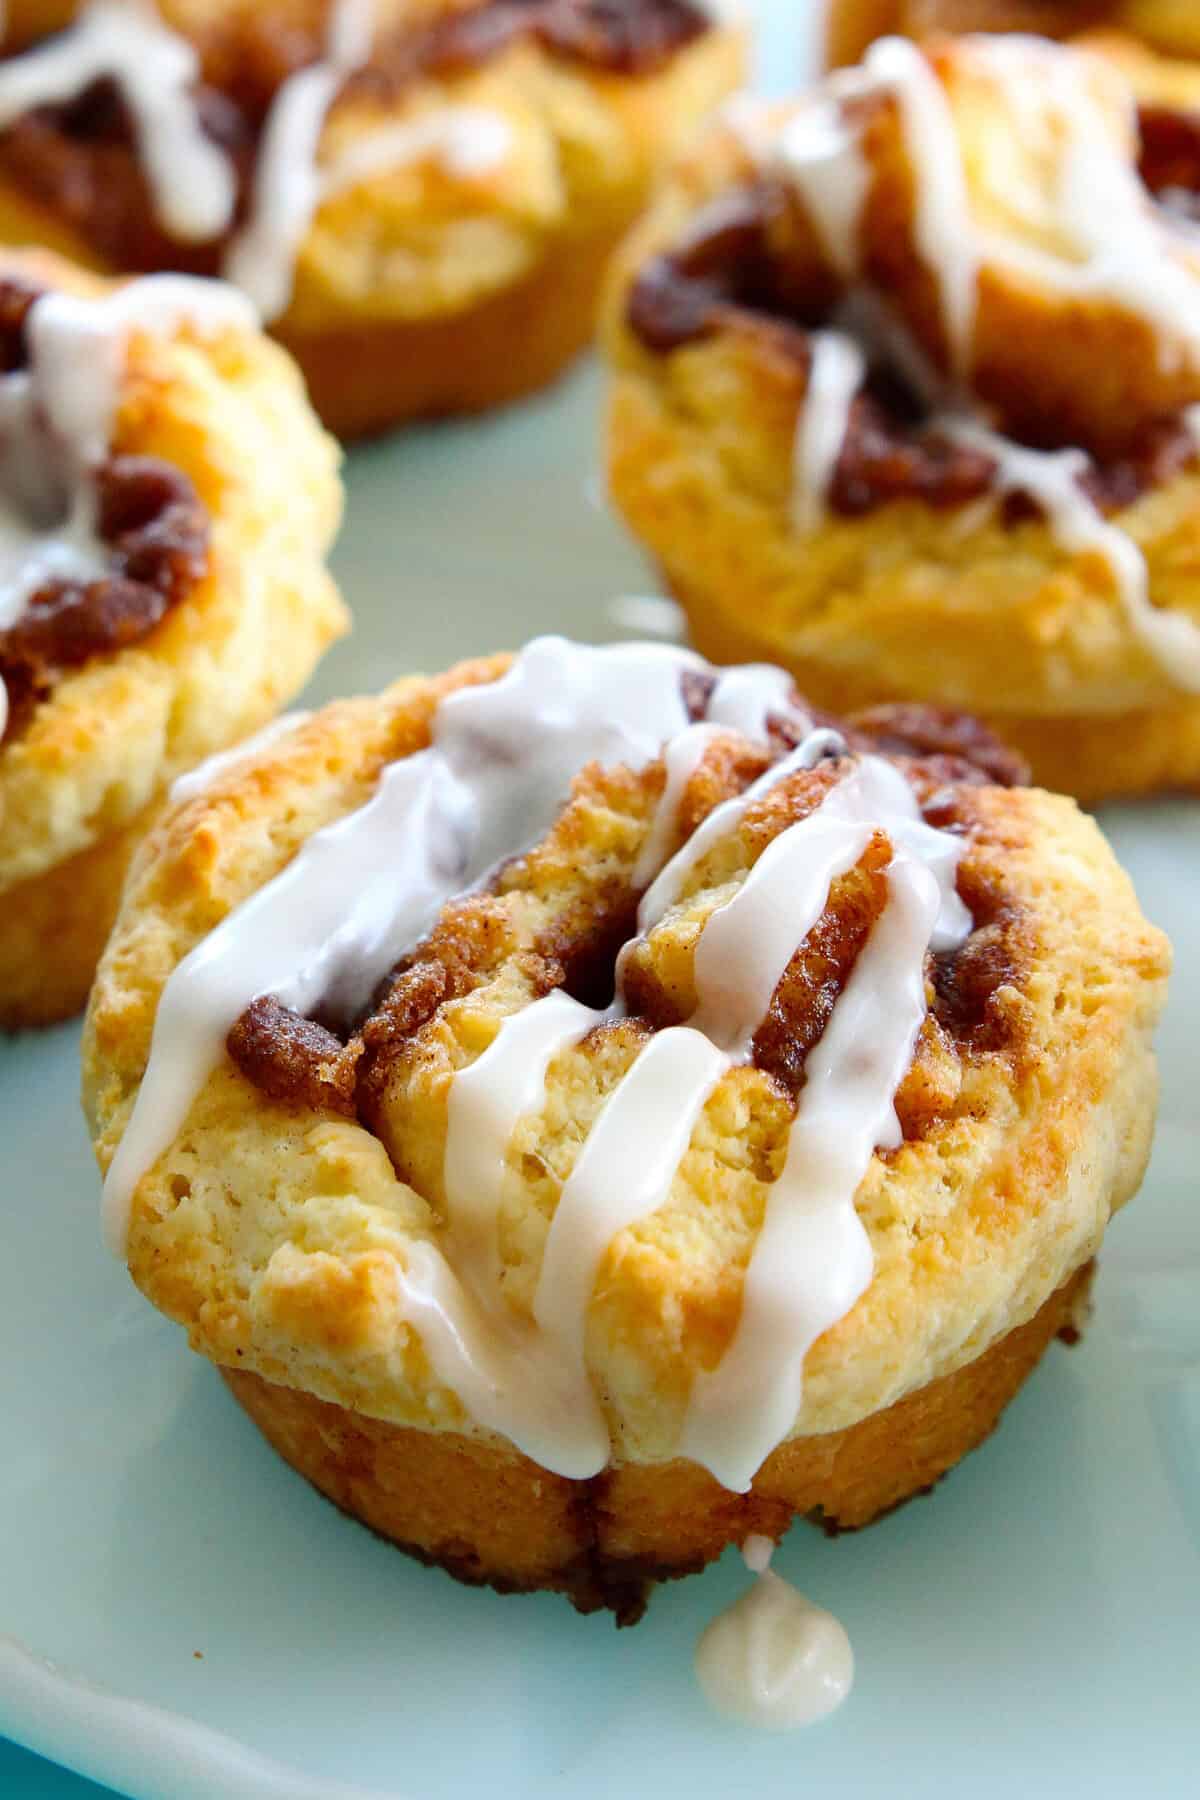 cinnamon rolls coated in buttery vanilla icing glaze on a plate (close-up)